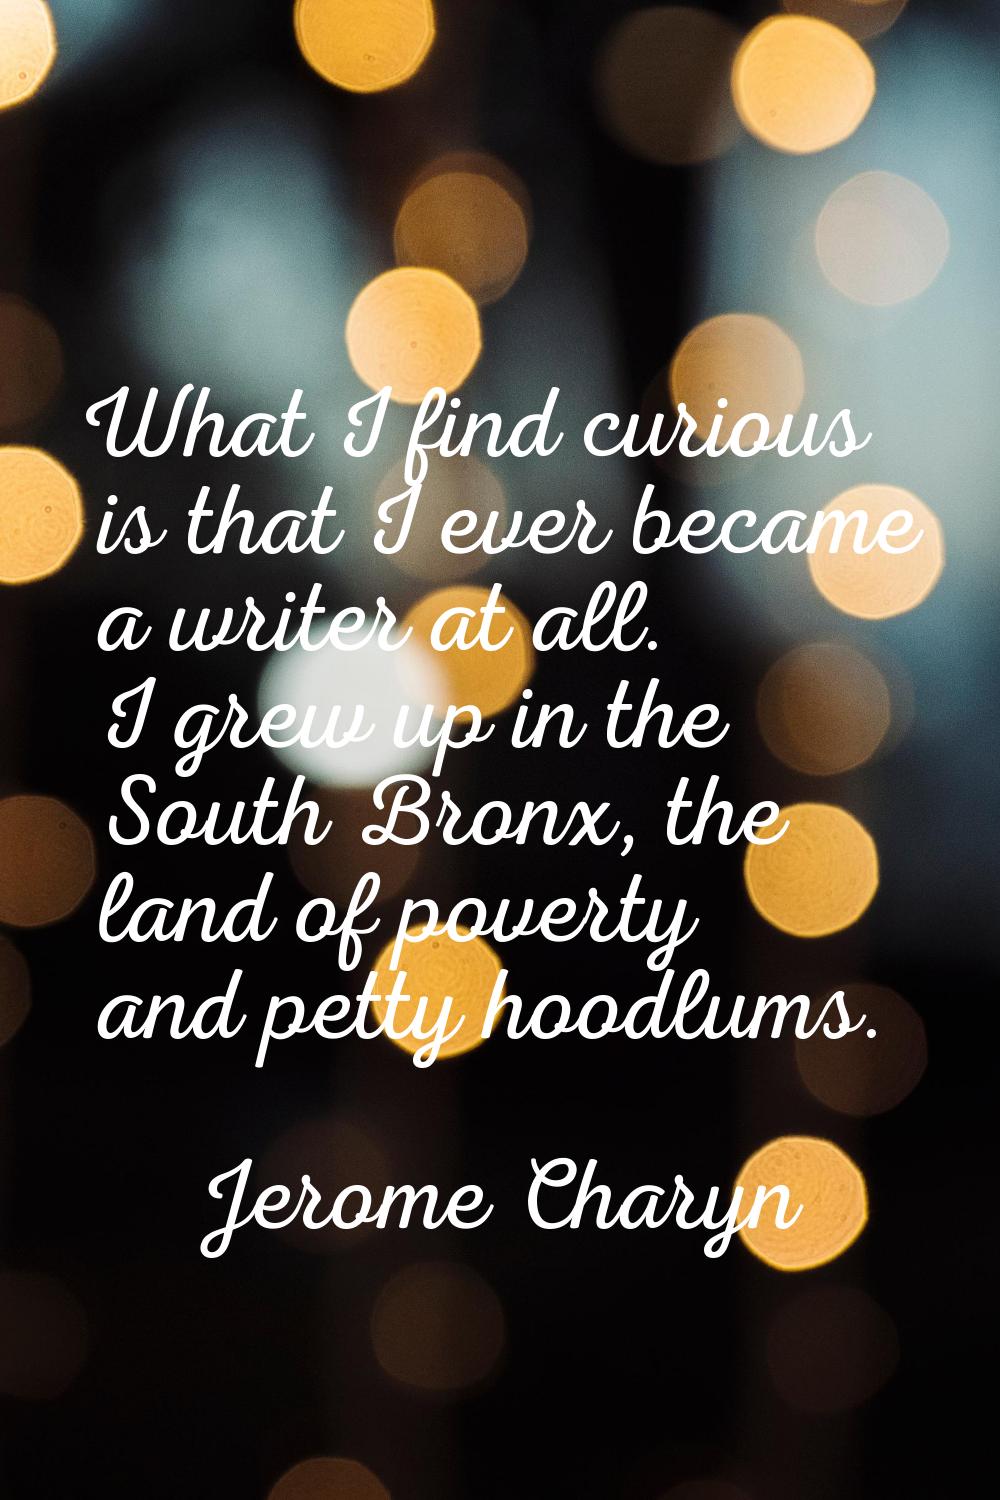 What I find curious is that I ever became a writer at all. I grew up in the South Bronx, the land o